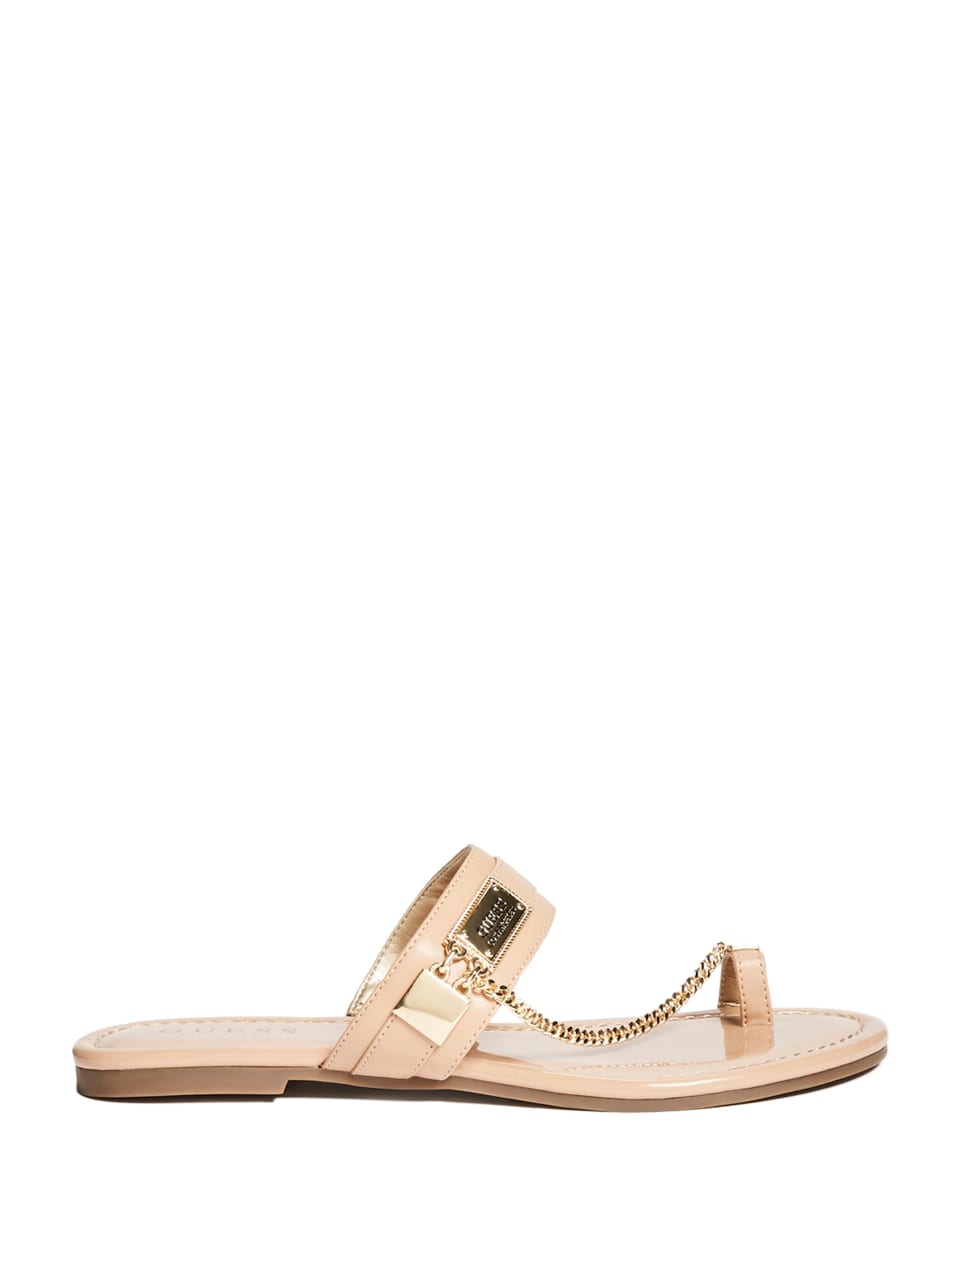 guess sandals with chain